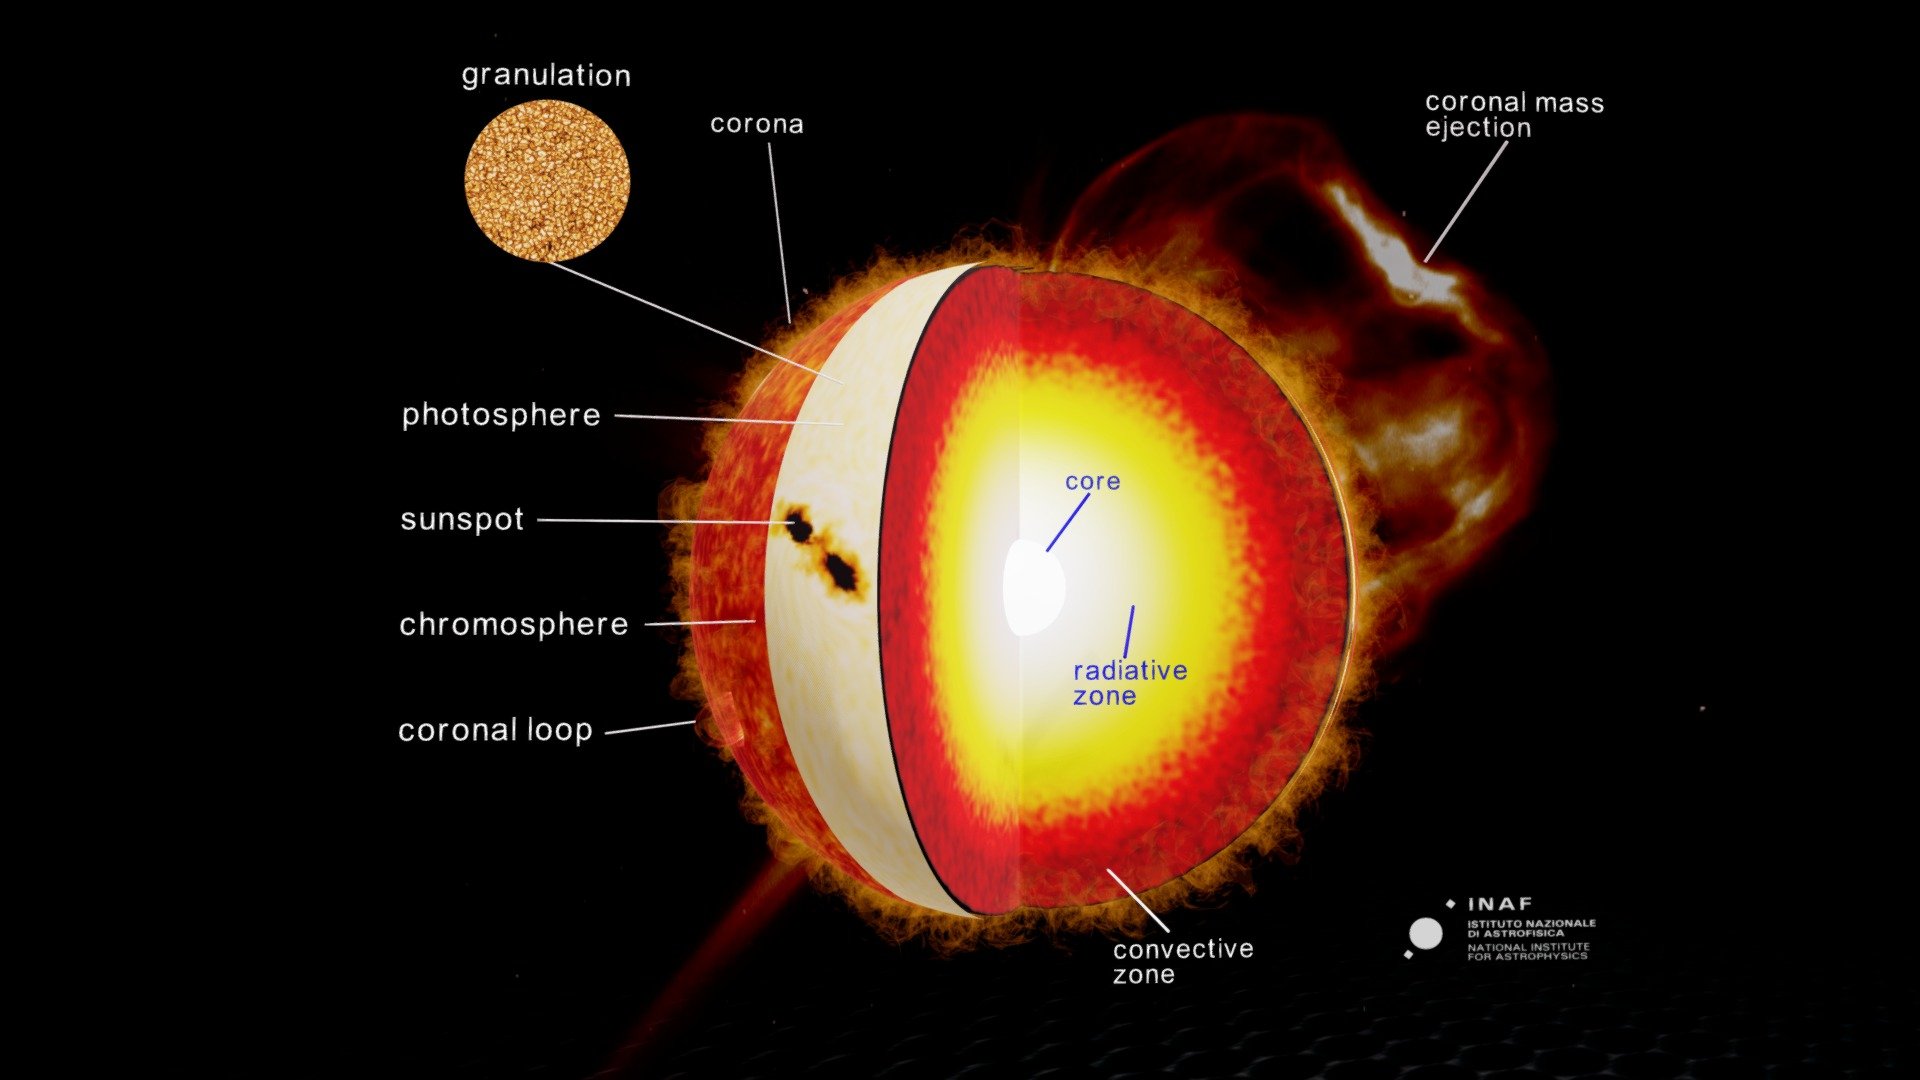 From the interior to the outer atmosphere: core, where nuclear reaction occurs, the engine of the star; radiative zone, where energy is primarily transported toward the exterior by means of radiative diffusion; convective zone, where energy is primarily transported by convection; photosphere, the shell from which light is radiated; chromosphere, a layer above the photosphere, from where a forest of hairy-appearing spicules rise; corona, atop the chromosphere through a thin transition region, the outermost part of the star's atmosphere, where the plasma is very tenuos and hot. The phostosphere surface is characterized by granules, due to convection of plasma within the convective zone, and sunspots, temporary regions of reduced temperature. The corona is a very dynamic and inhomogeneous environement made of loops and that hosts very energetic and transient phenomena as flares and coronal mass ejections.

Credit: INAF-OAPA. Granules: D.K. Inouye Solar Telescope. Music provided by https://filmstro.com/ 3d model